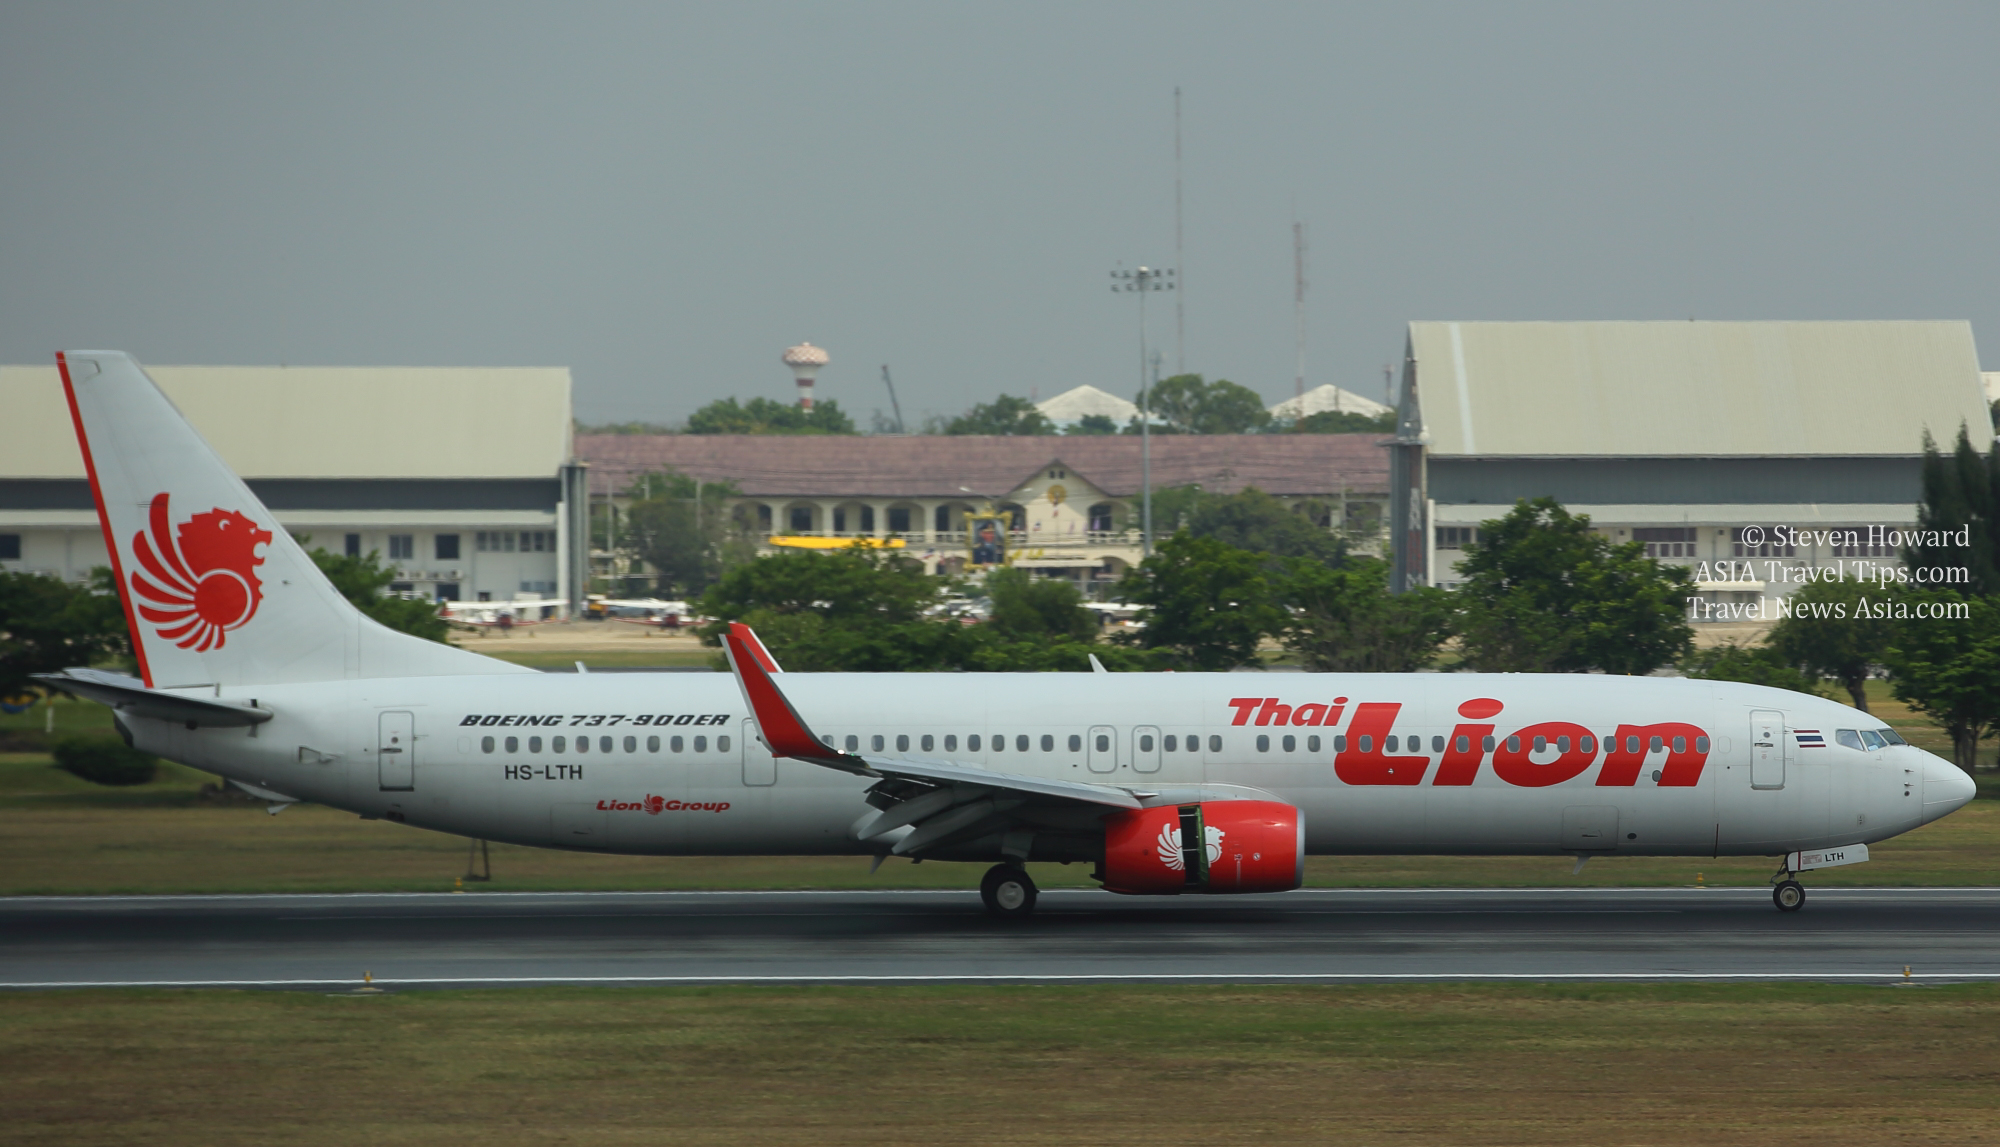 Thai Lion Air Boeing 737-900ER aircraft at Don Mueang Airport in Bangkok, Thailand. Picture by Steven Howard of TravelNewsAsia.com Click to enlarge.